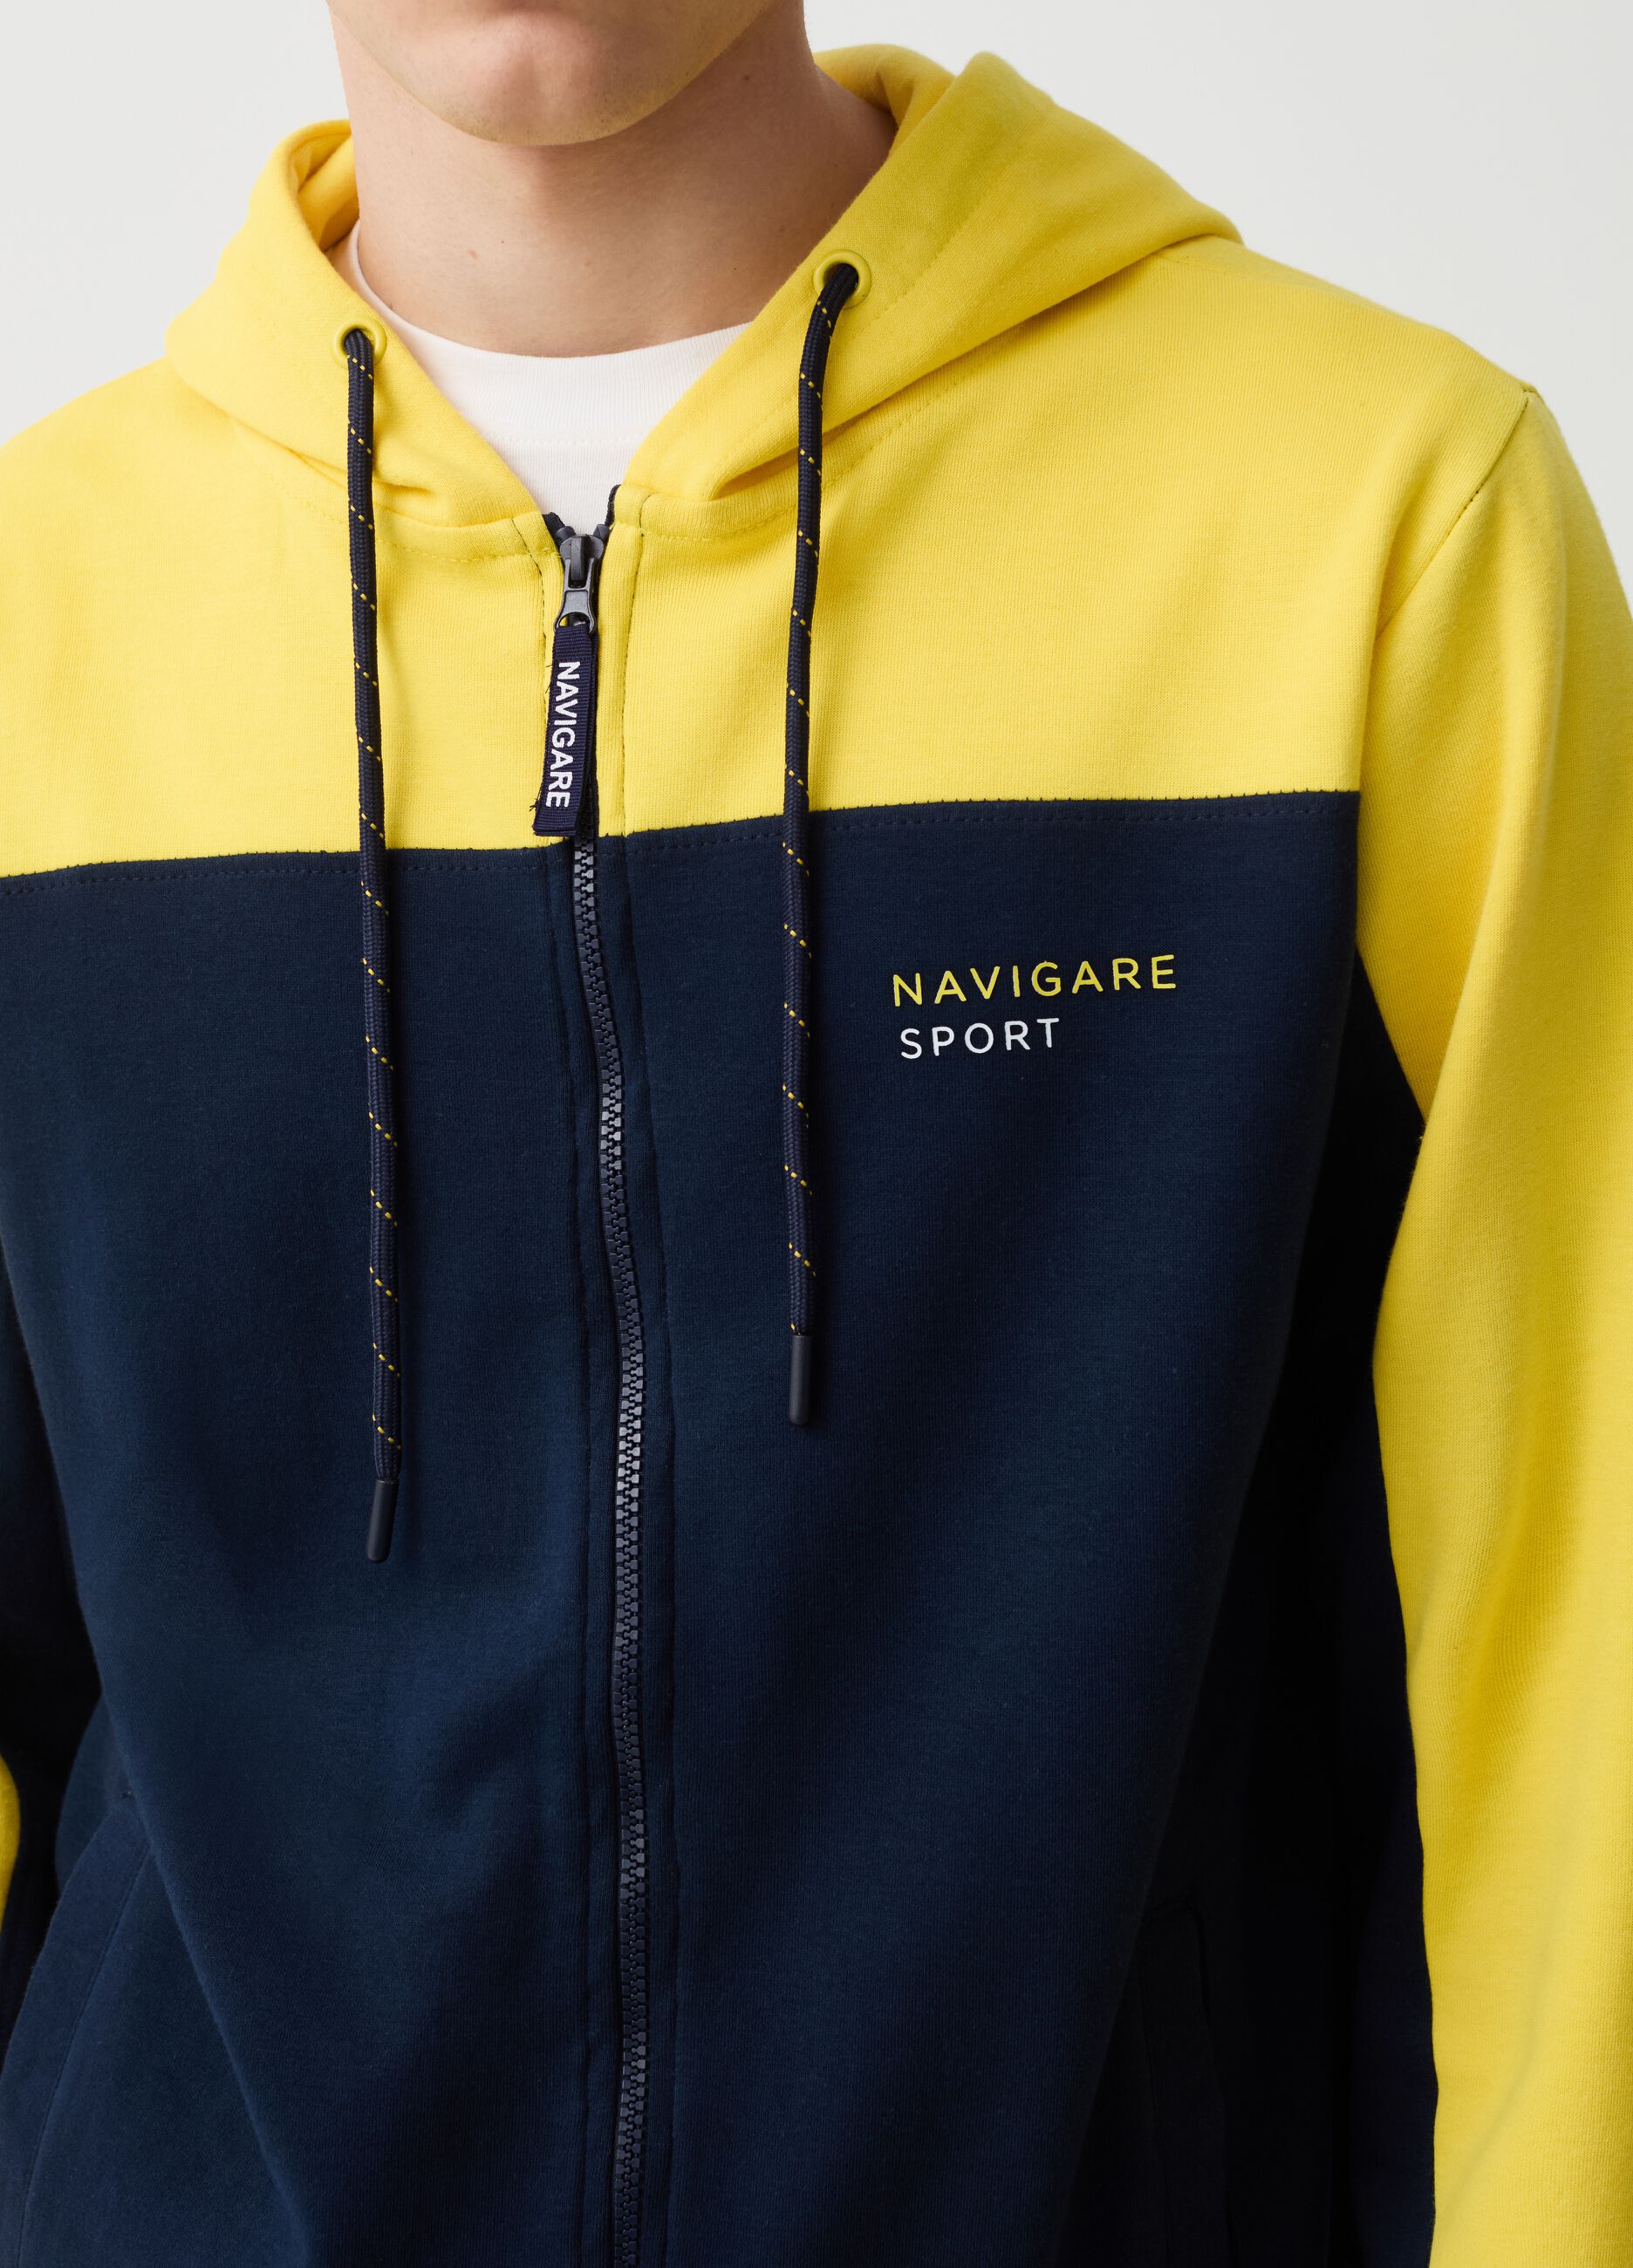 Navigare Sport two-tone full-zip with hood